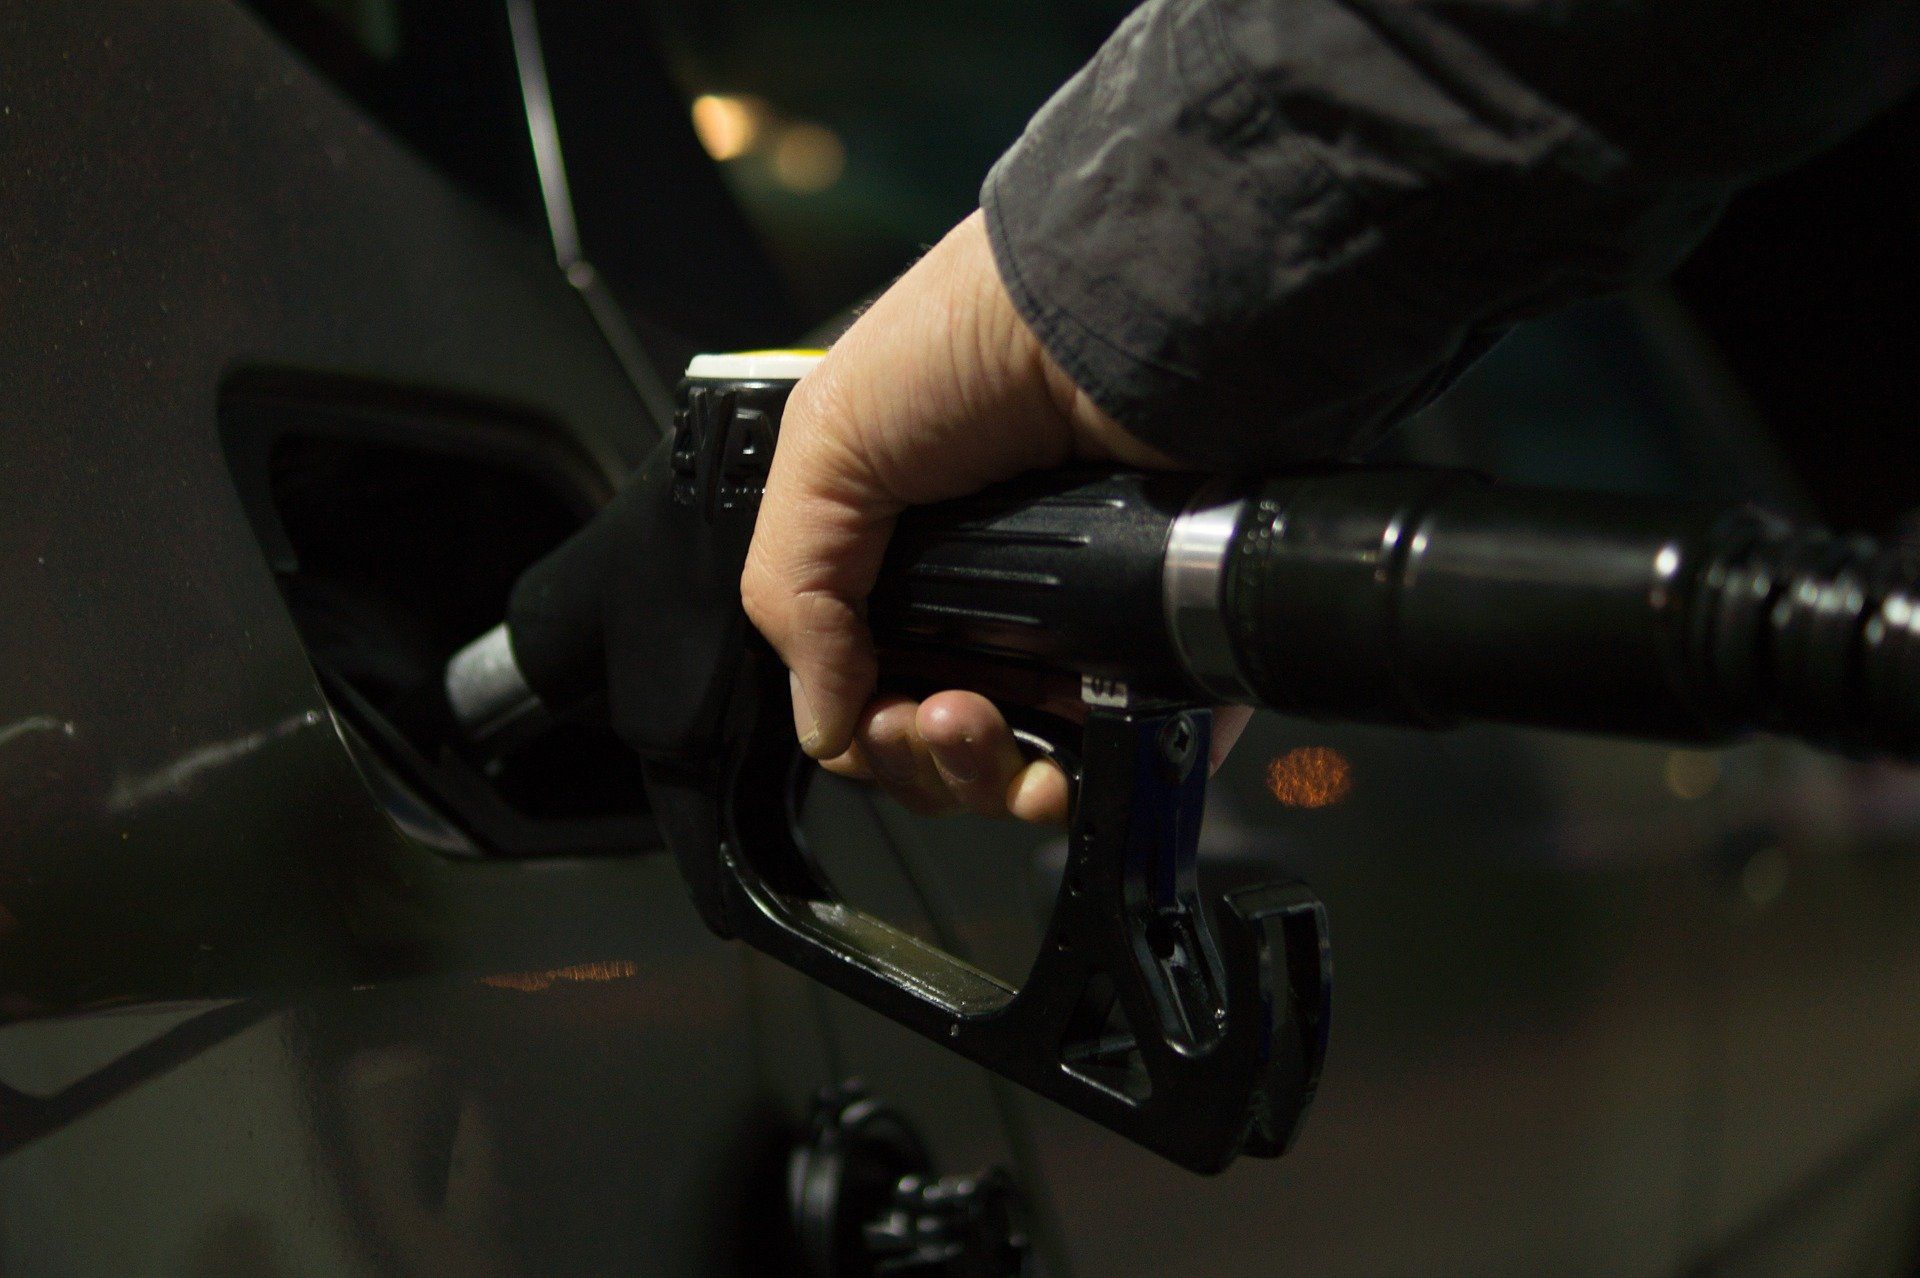 Fuel prices: Petrol priced at Rs 95.41, diesel Rs 86.67 in Delhi on March 7, 2022